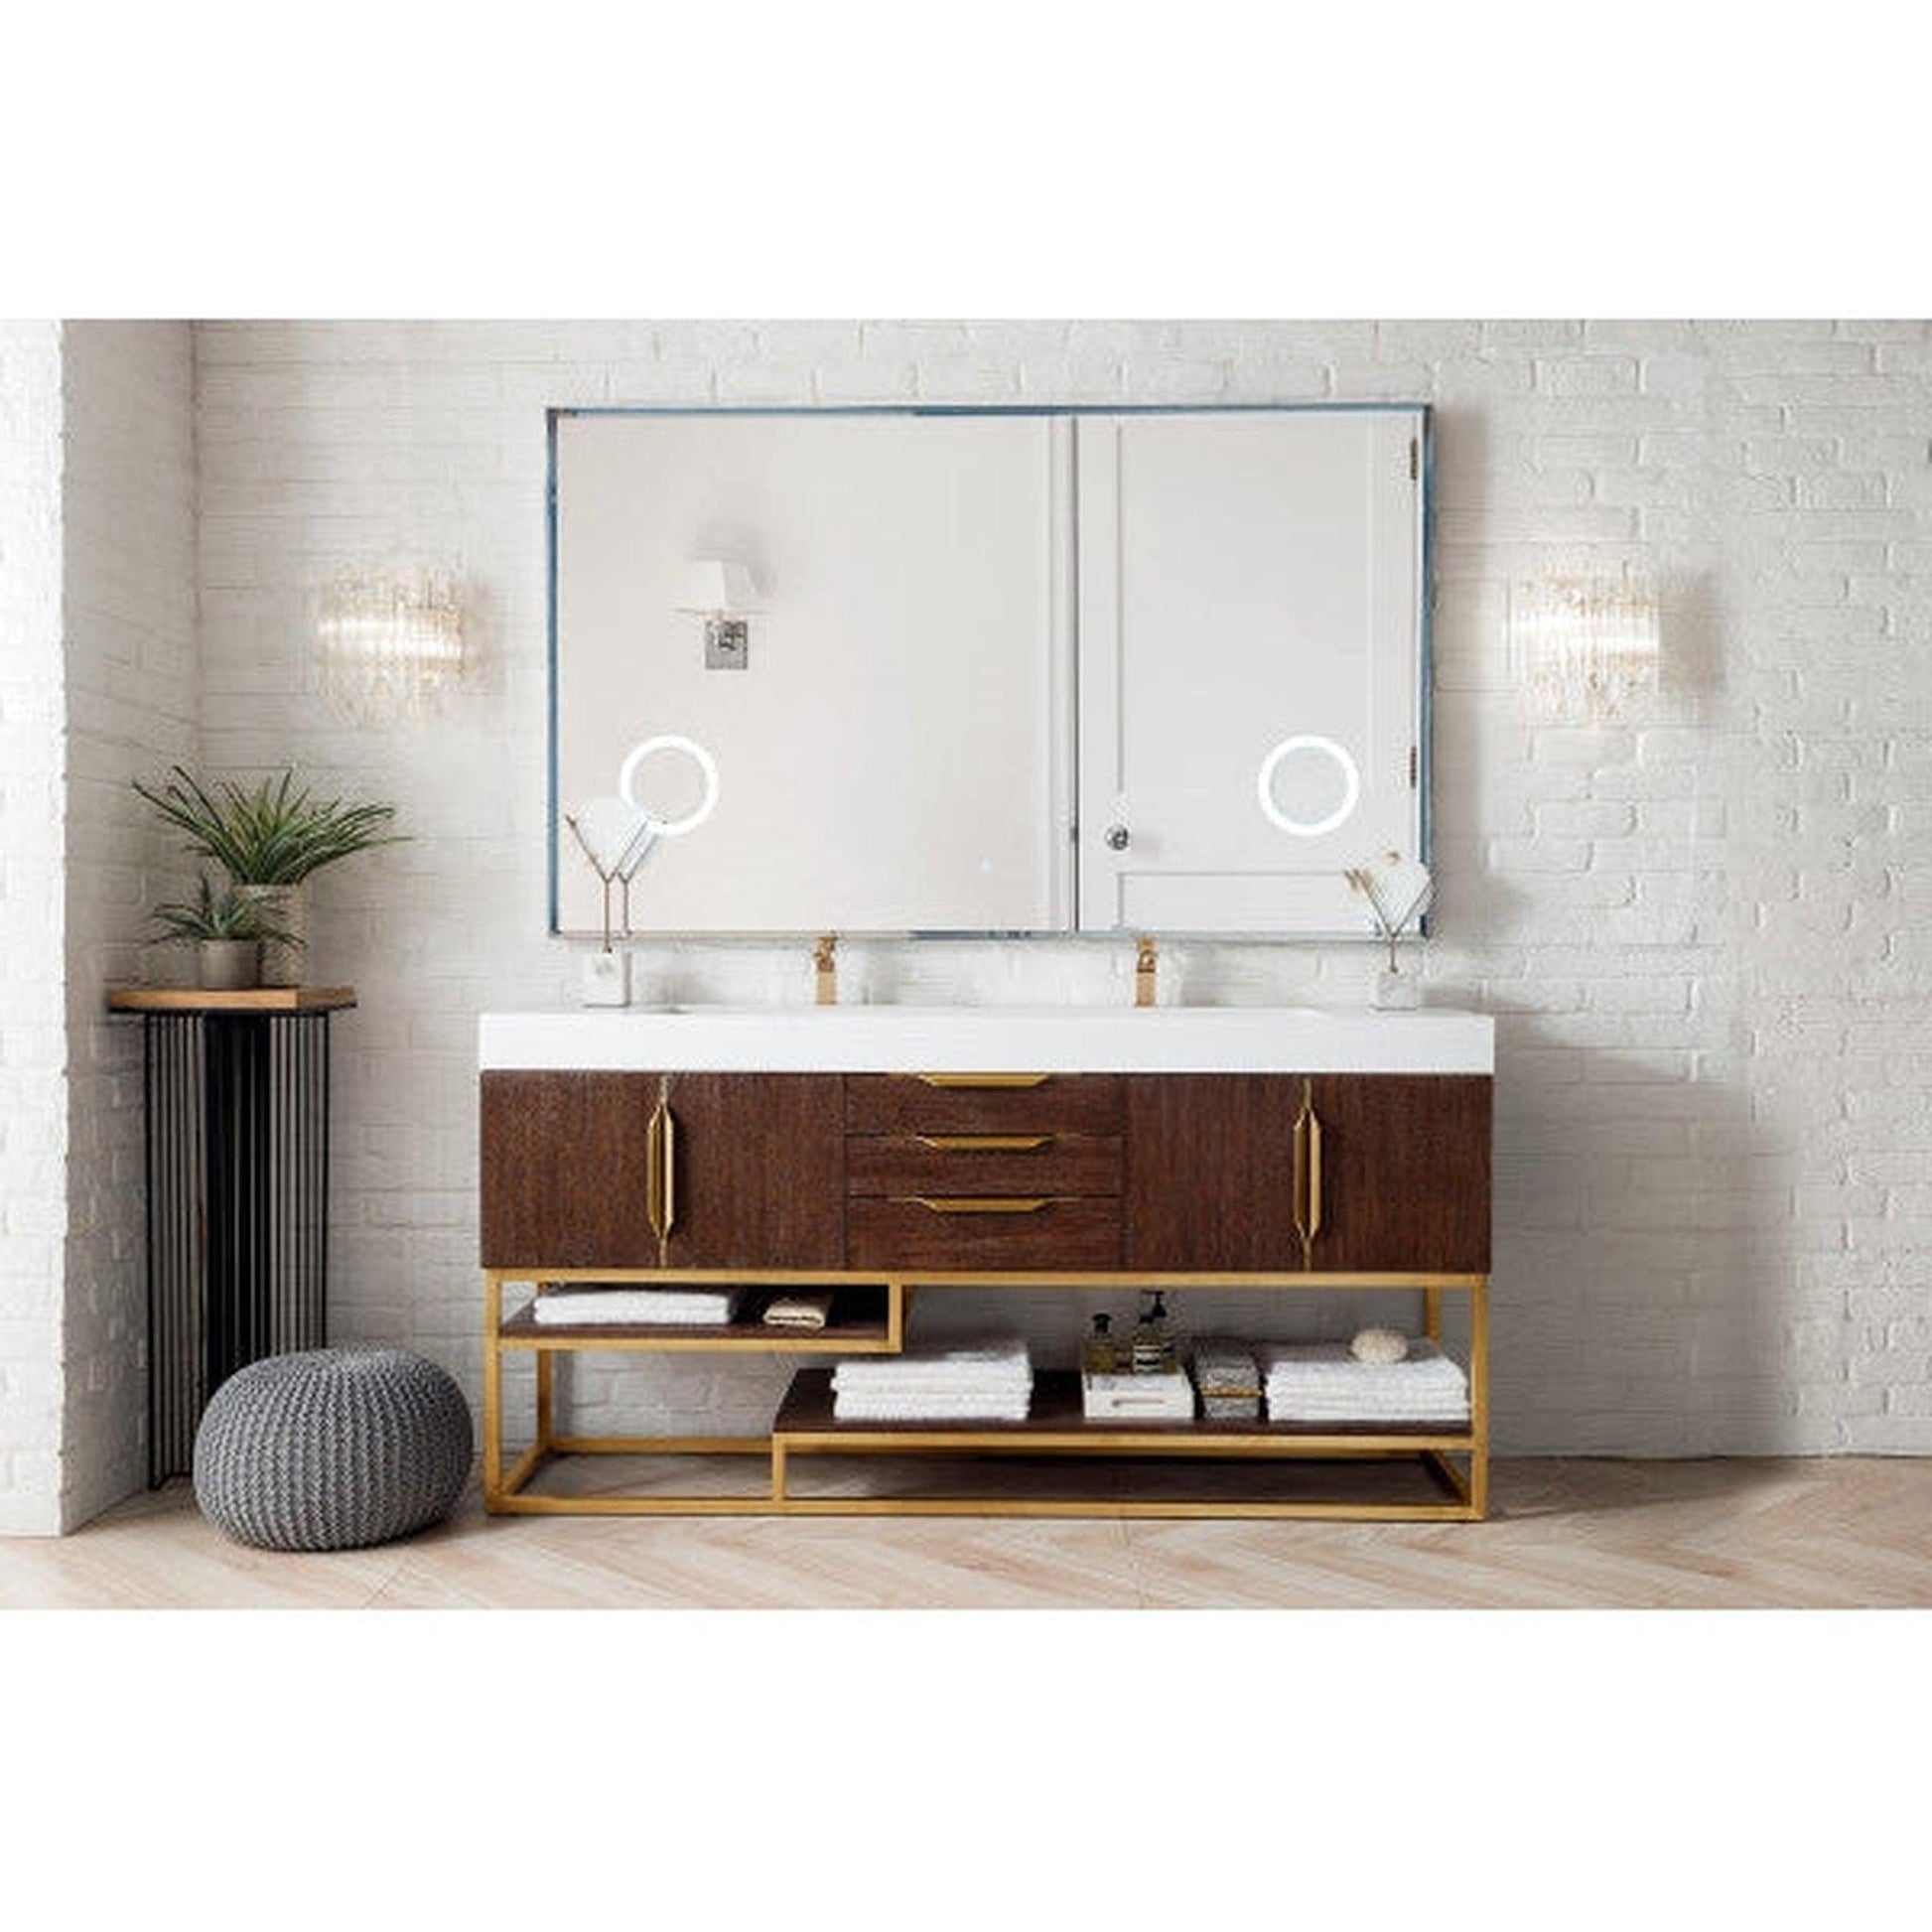 James Martin Columbia 73" Double Coffee Oak Bathroom Vanity With Radiant Gold Hardware and 6" Glossy White Composite Countertop